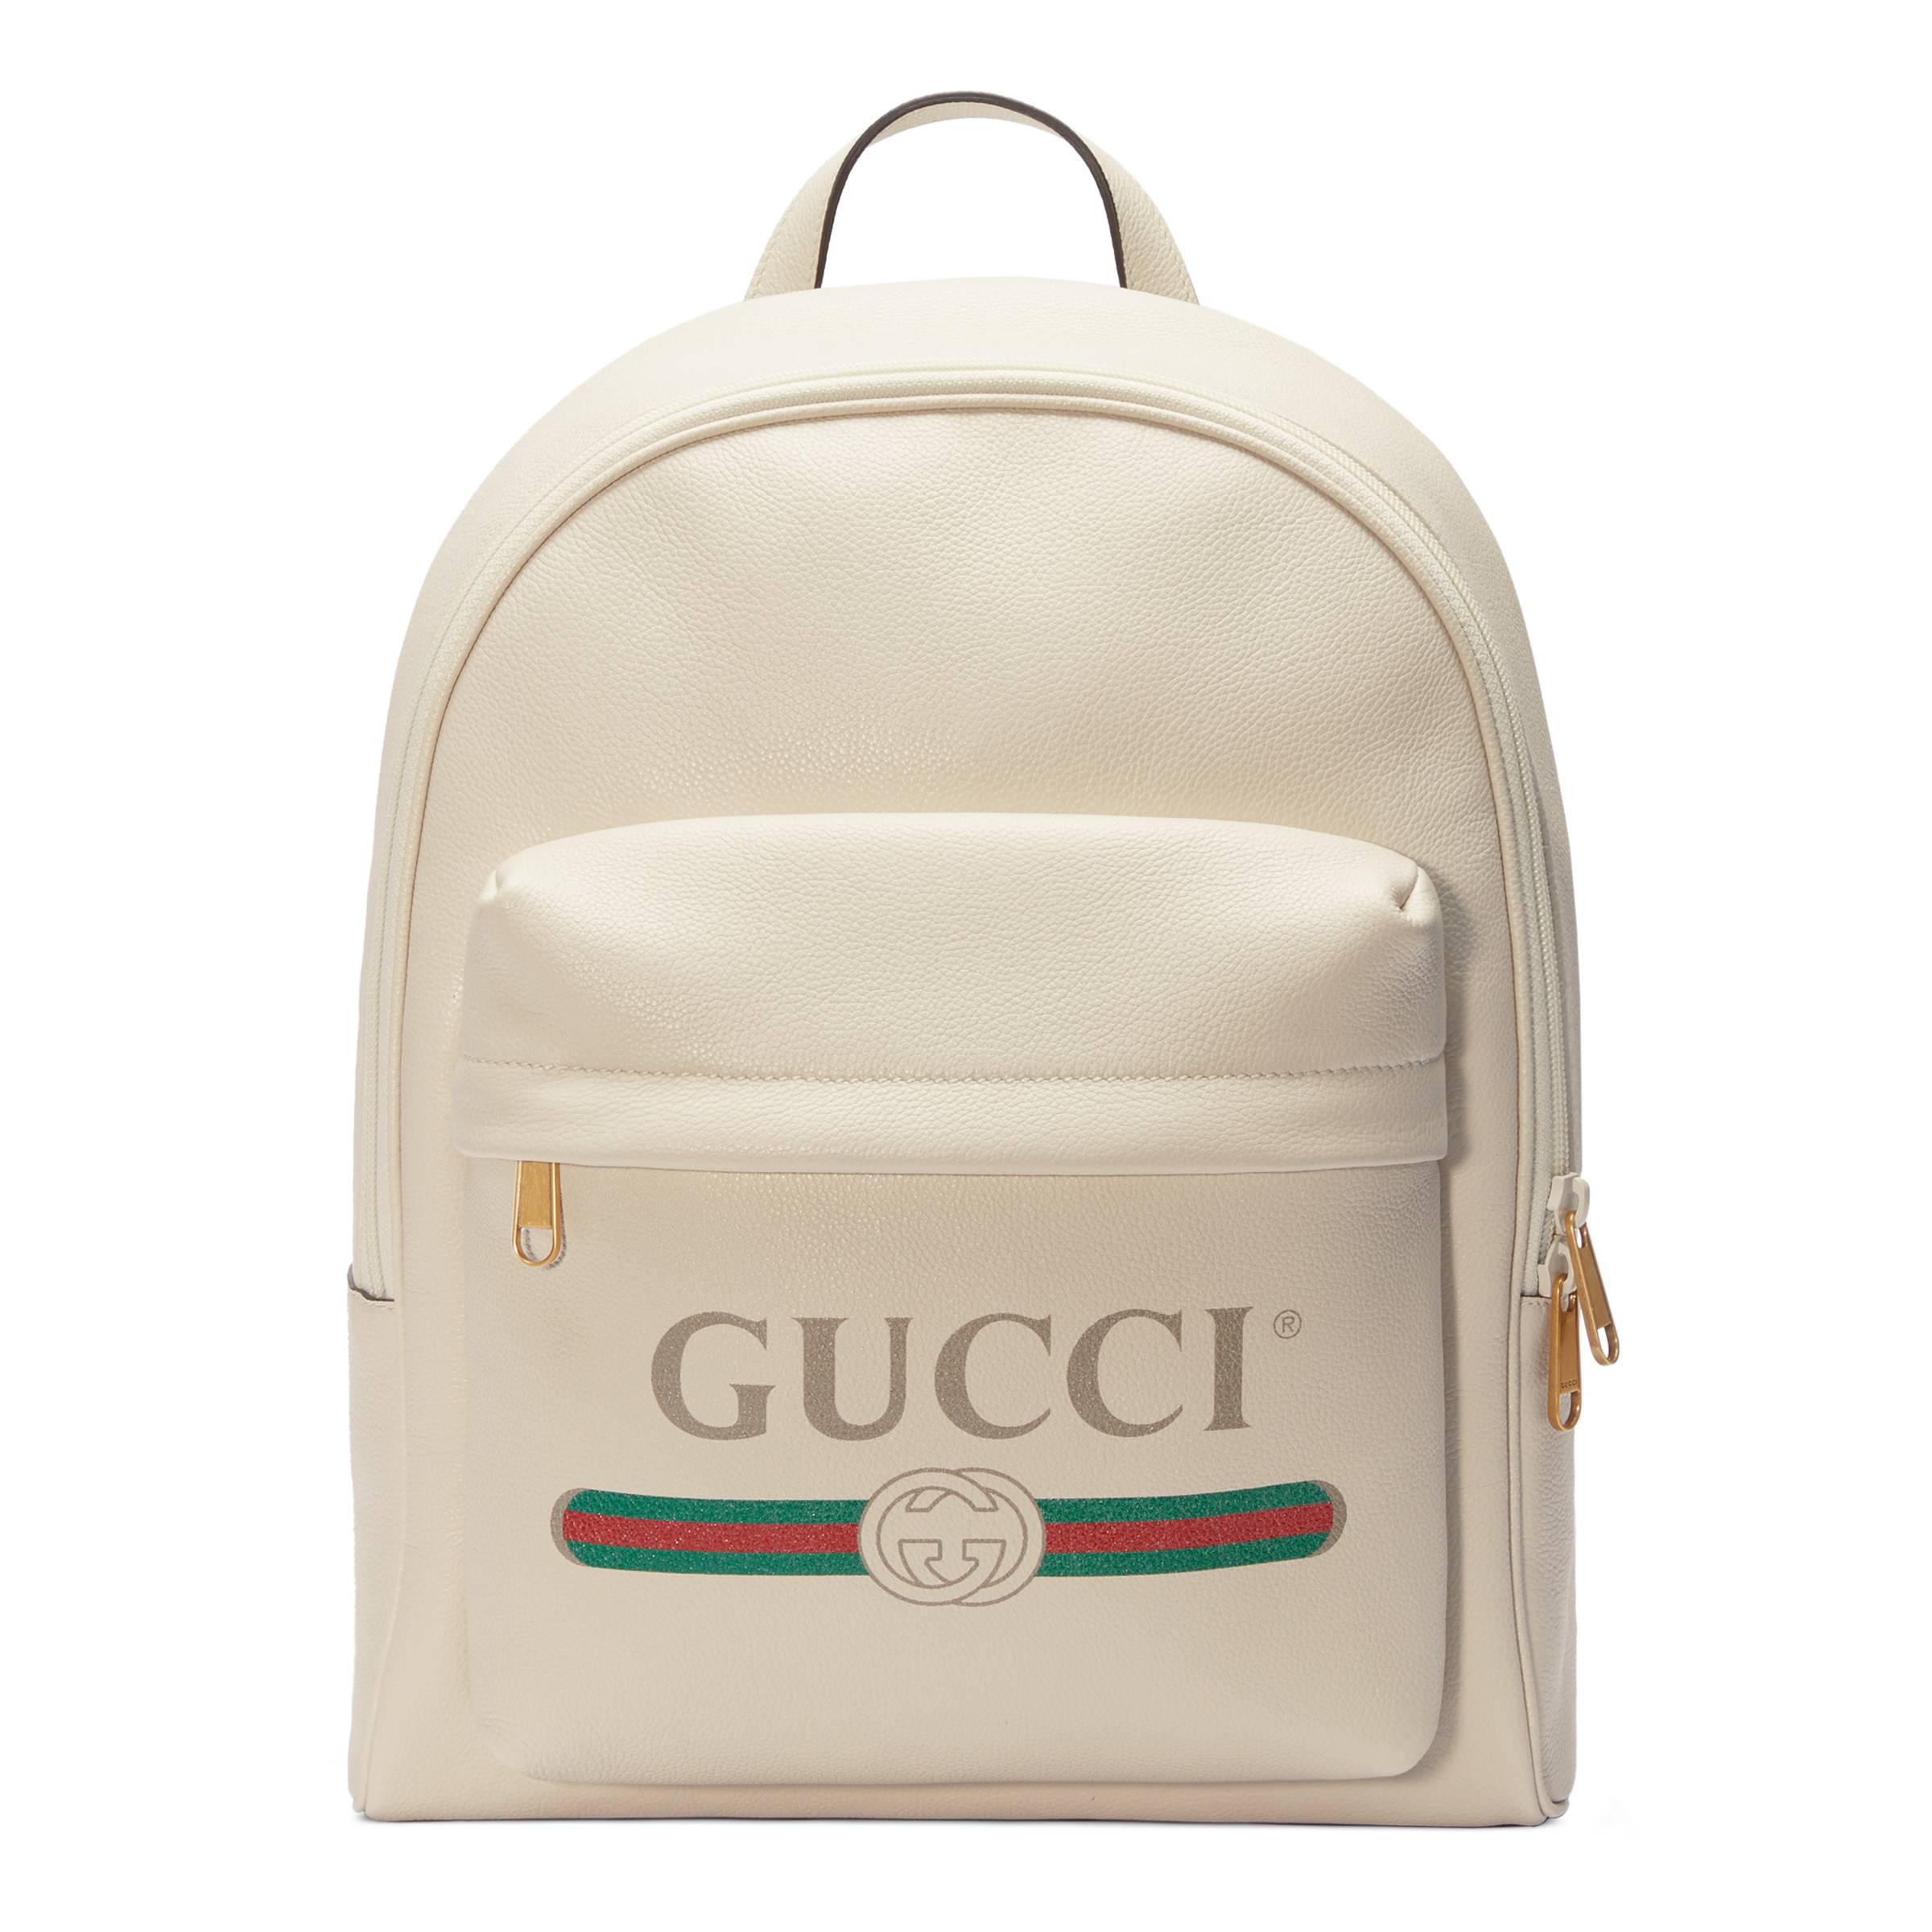 Gucci Print Leather Backpack in White | Lyst